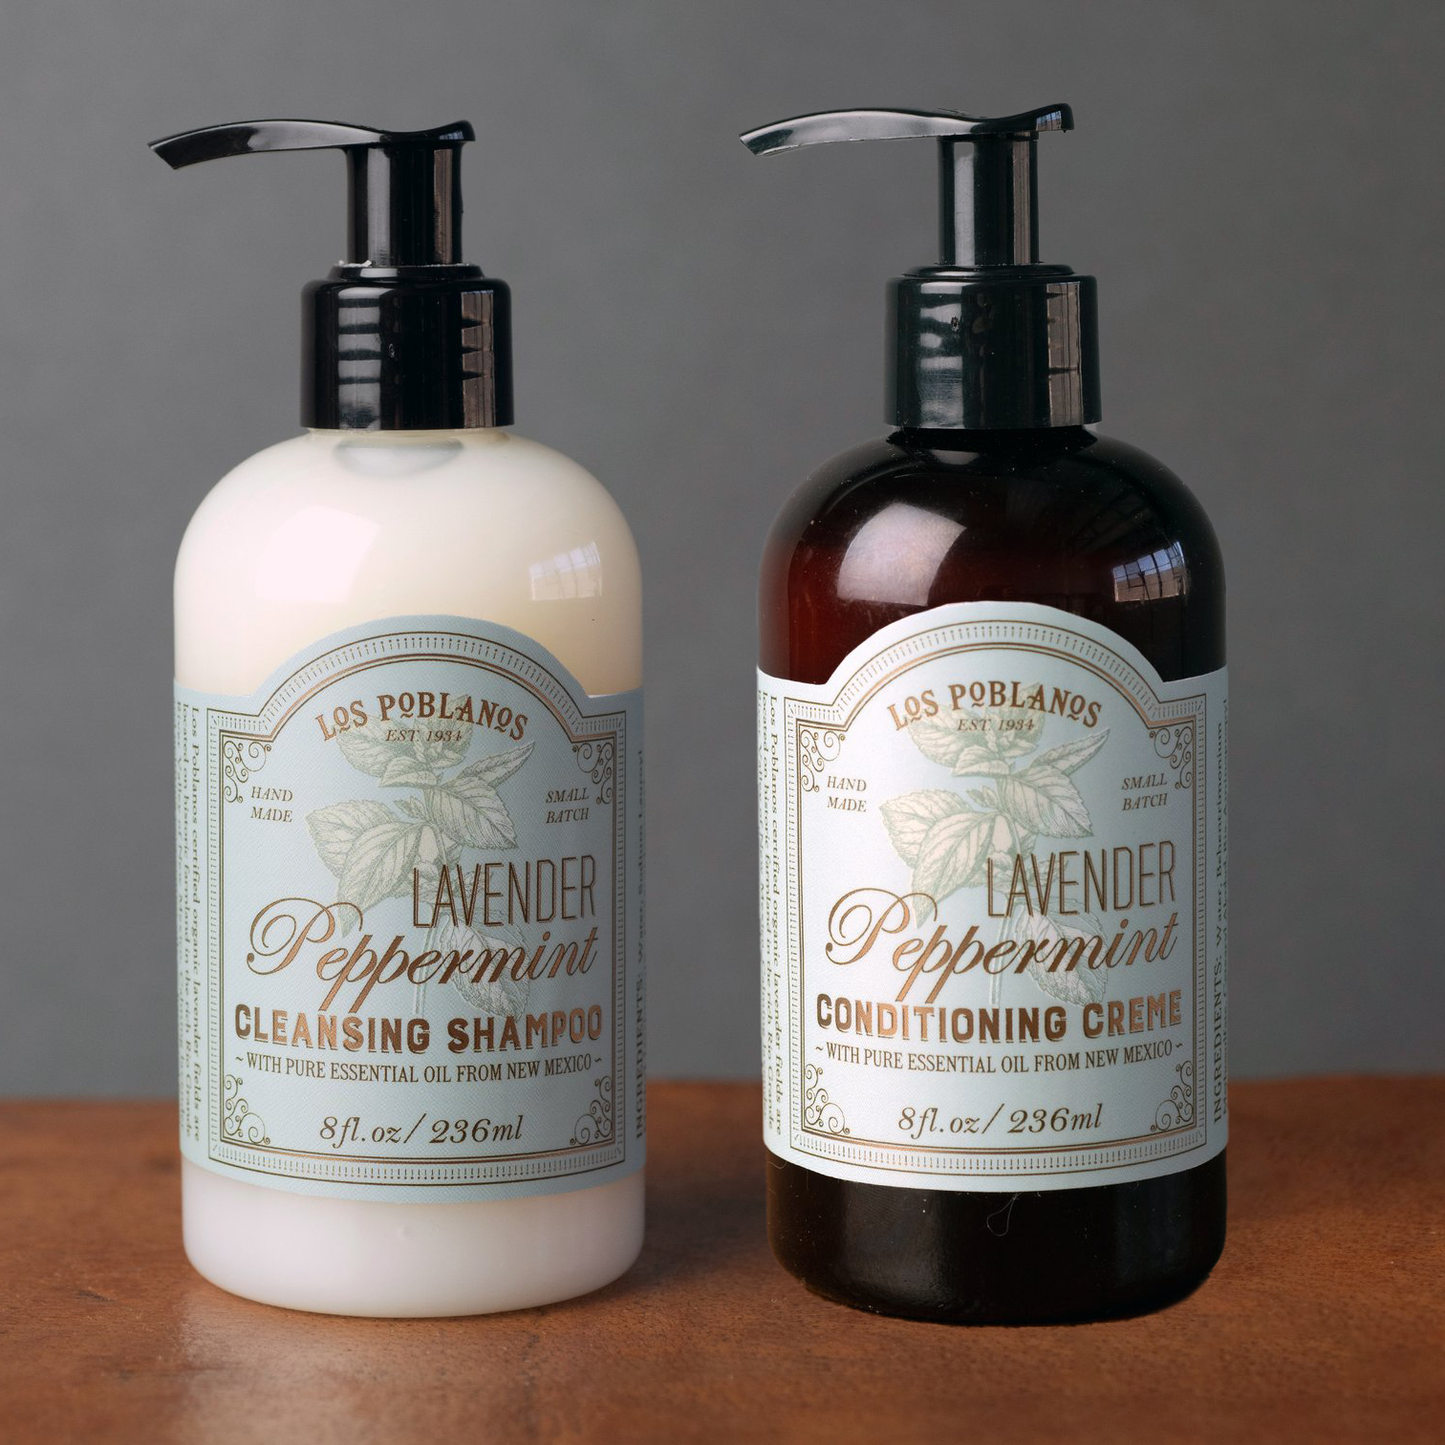 Lavender Peppermint Cleansing Shampoo & Conditioning Crème